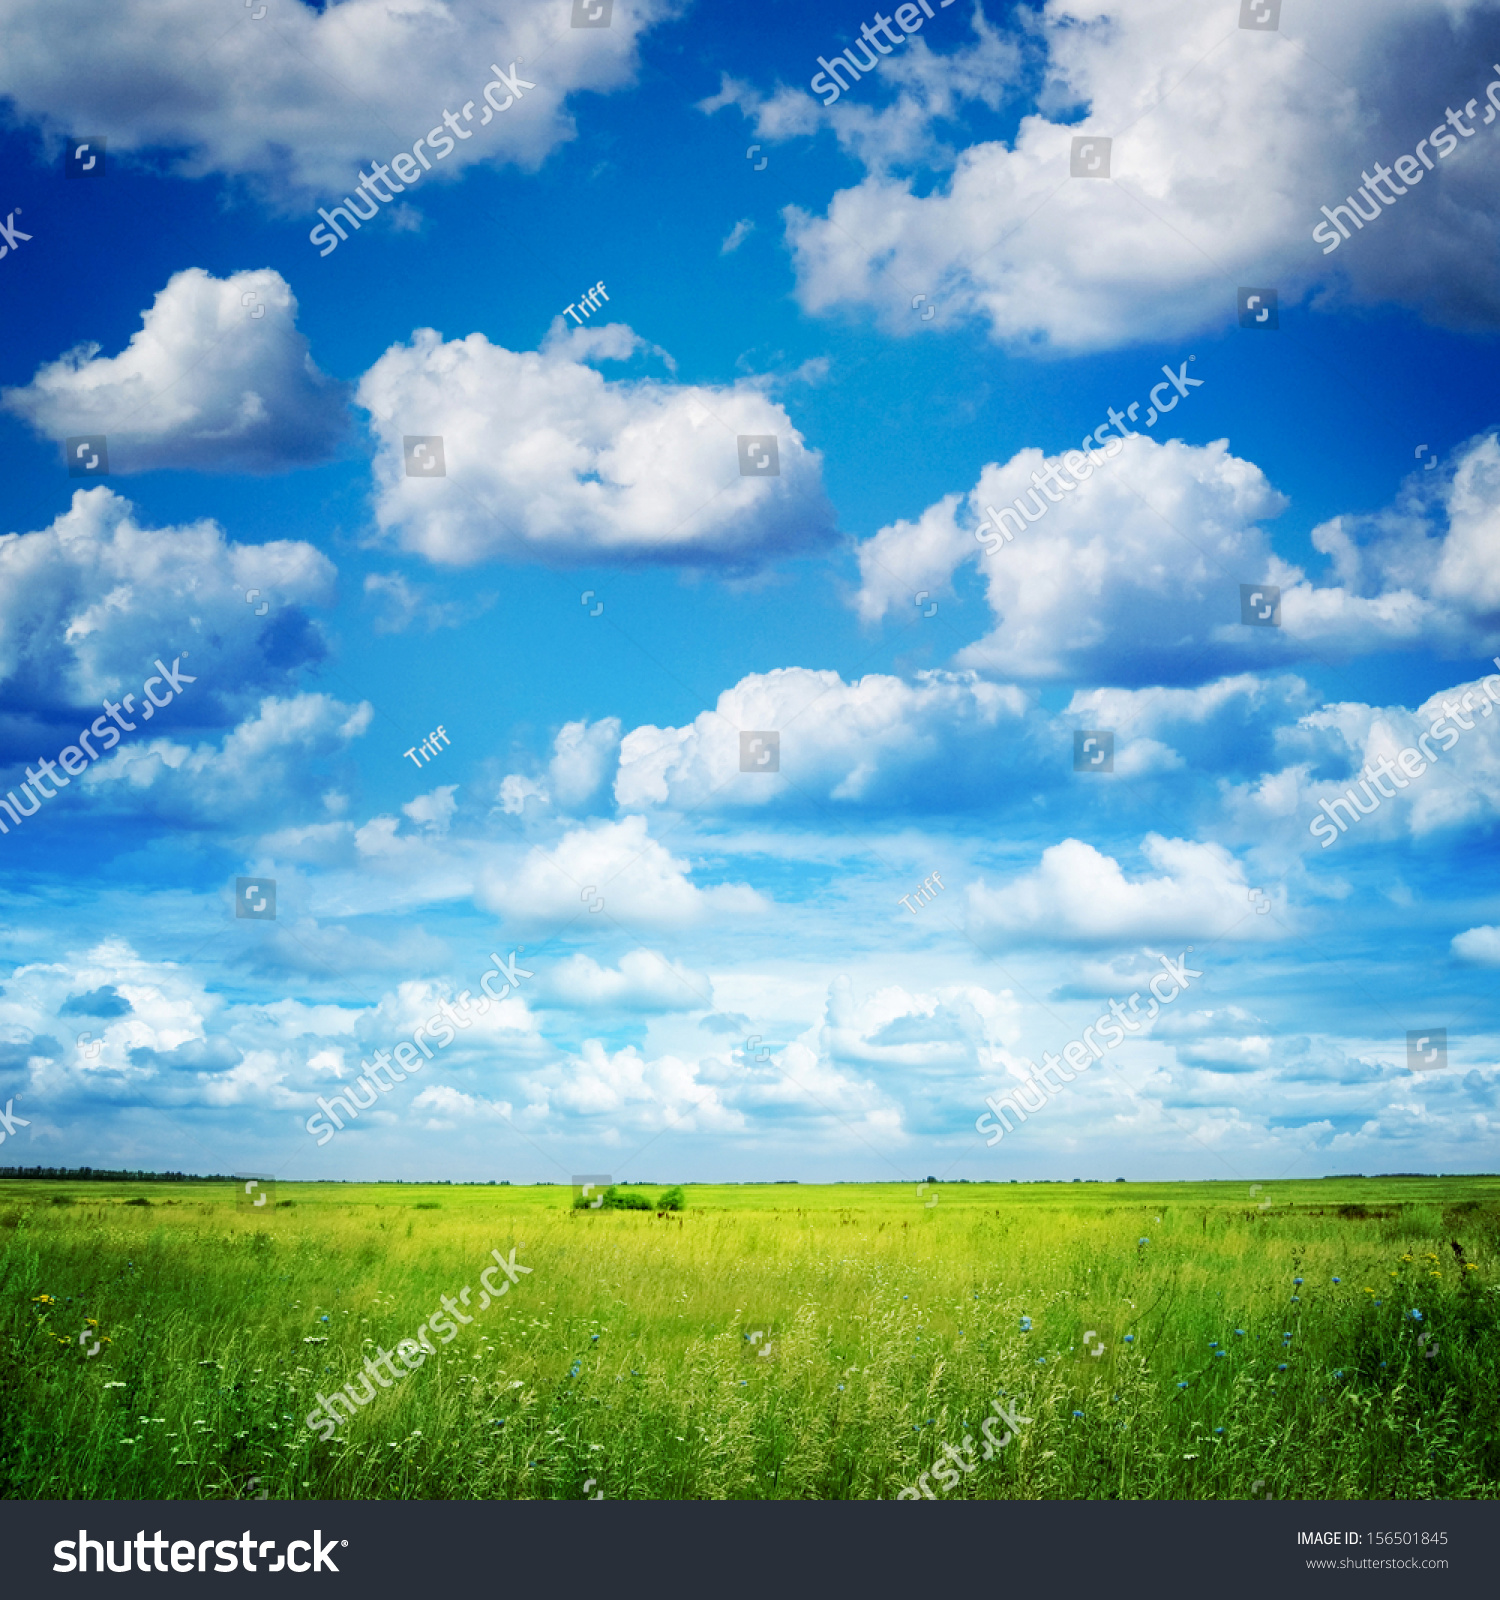 green field and blue sky #156501845